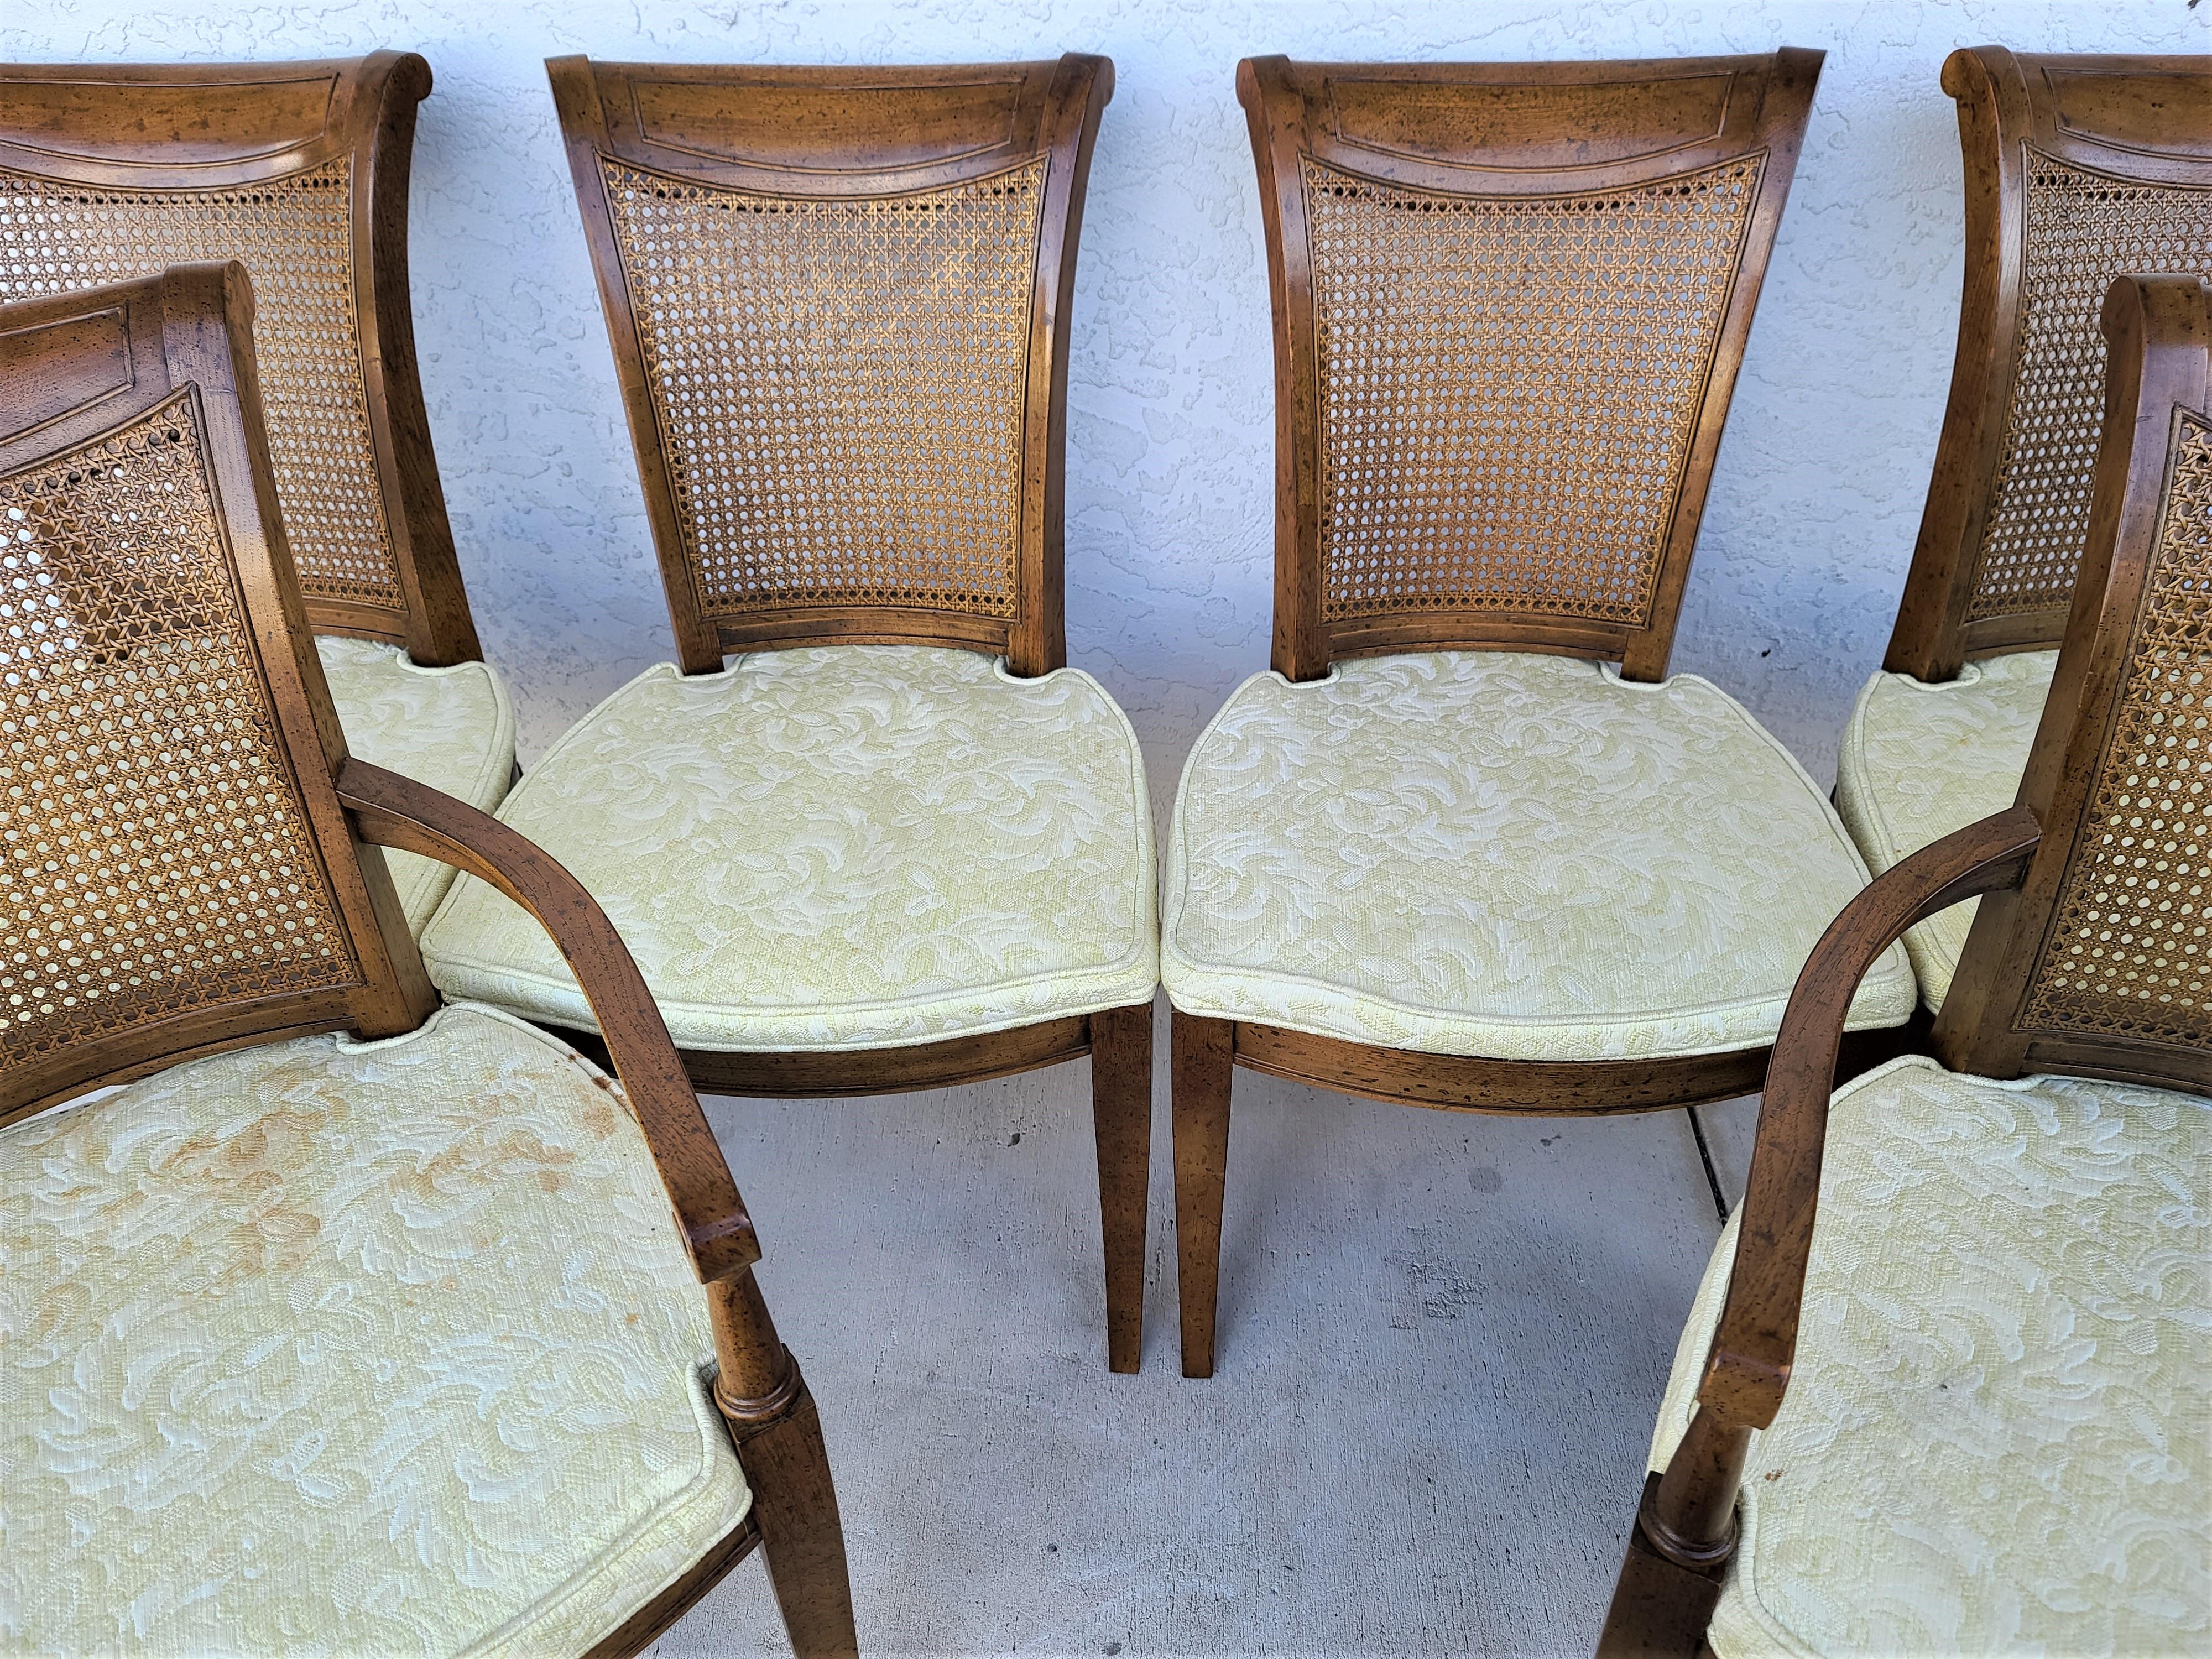 Offering one of our recent Palm Beach Estate fine furniture acquisitions of a
Set of 6 vintage Drexel Heritage italian style solid wood cane back dining chairs
2 arm and 4 side chairs.

Approximate measurements in inches
Armchairs:
35.5